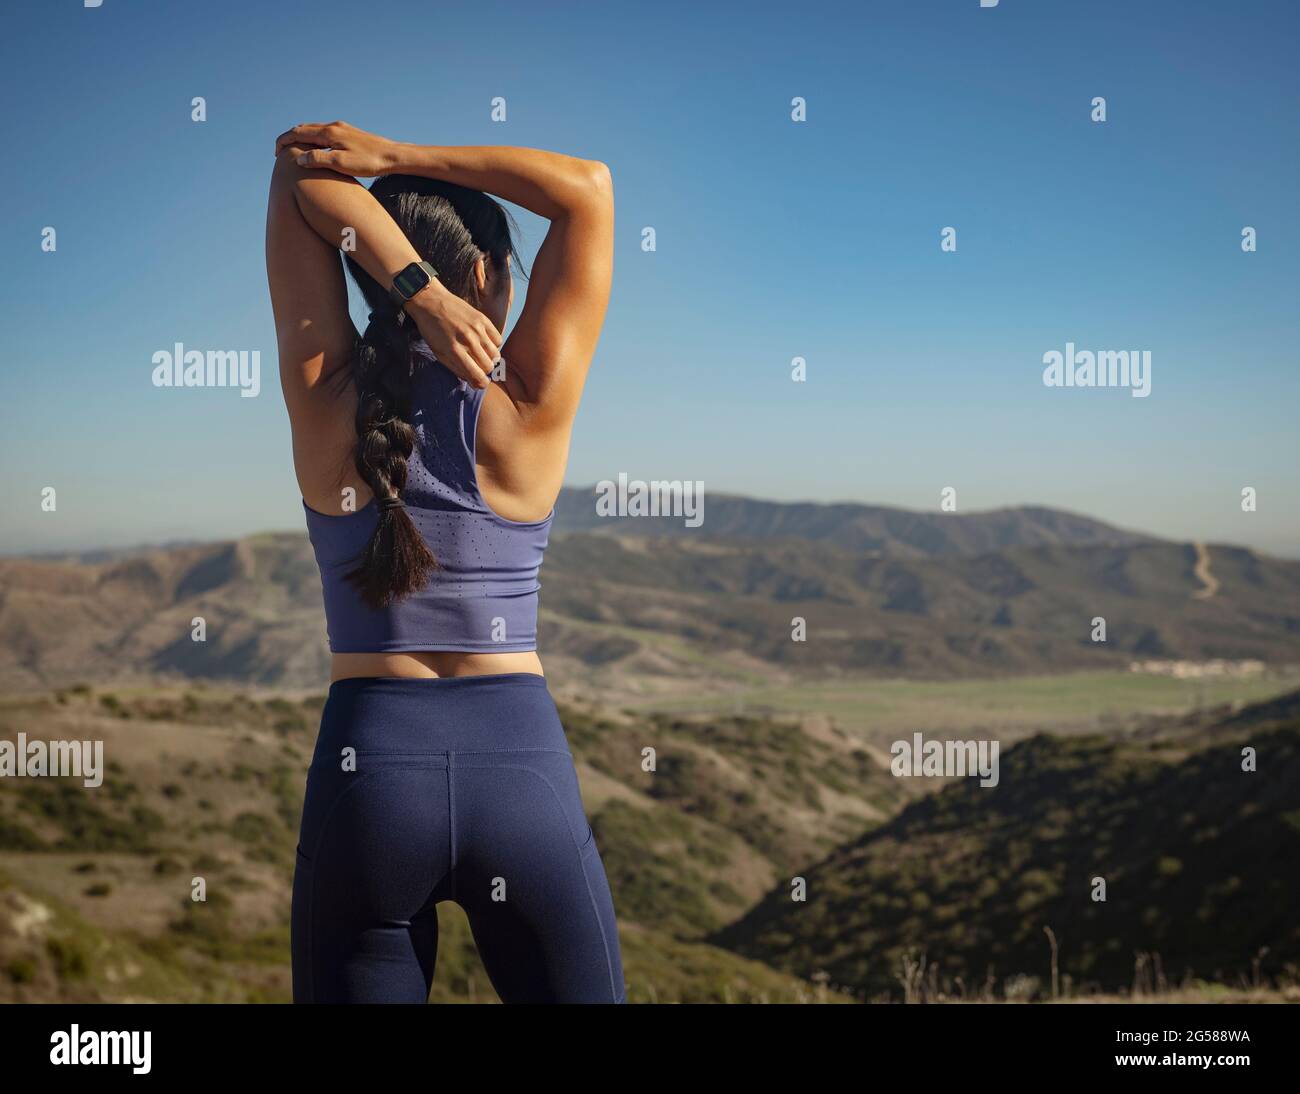 Rear view of woman stretching in landscape Stock Photo